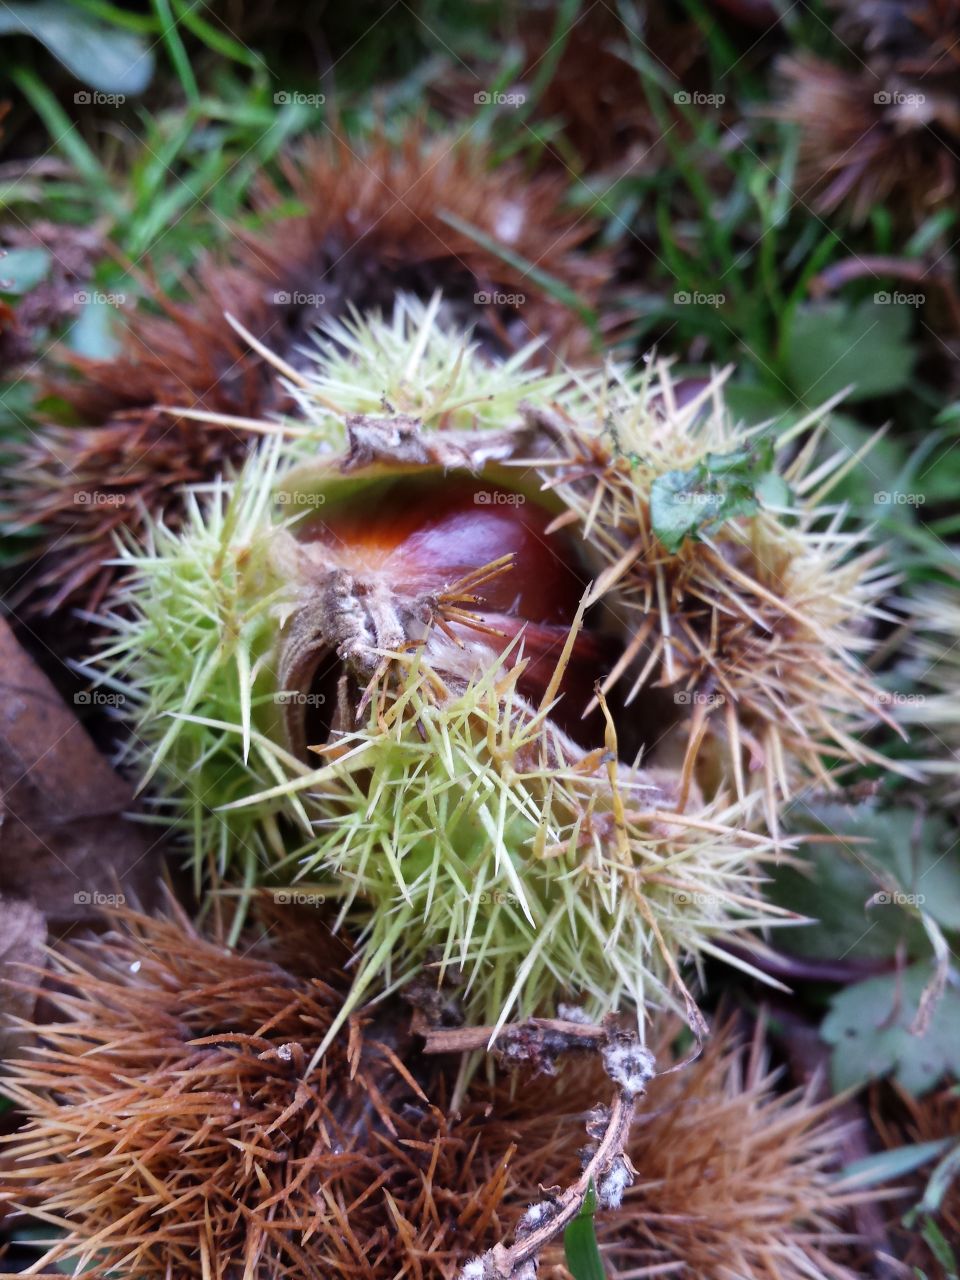 Chestnuts. chestnuts on the ground